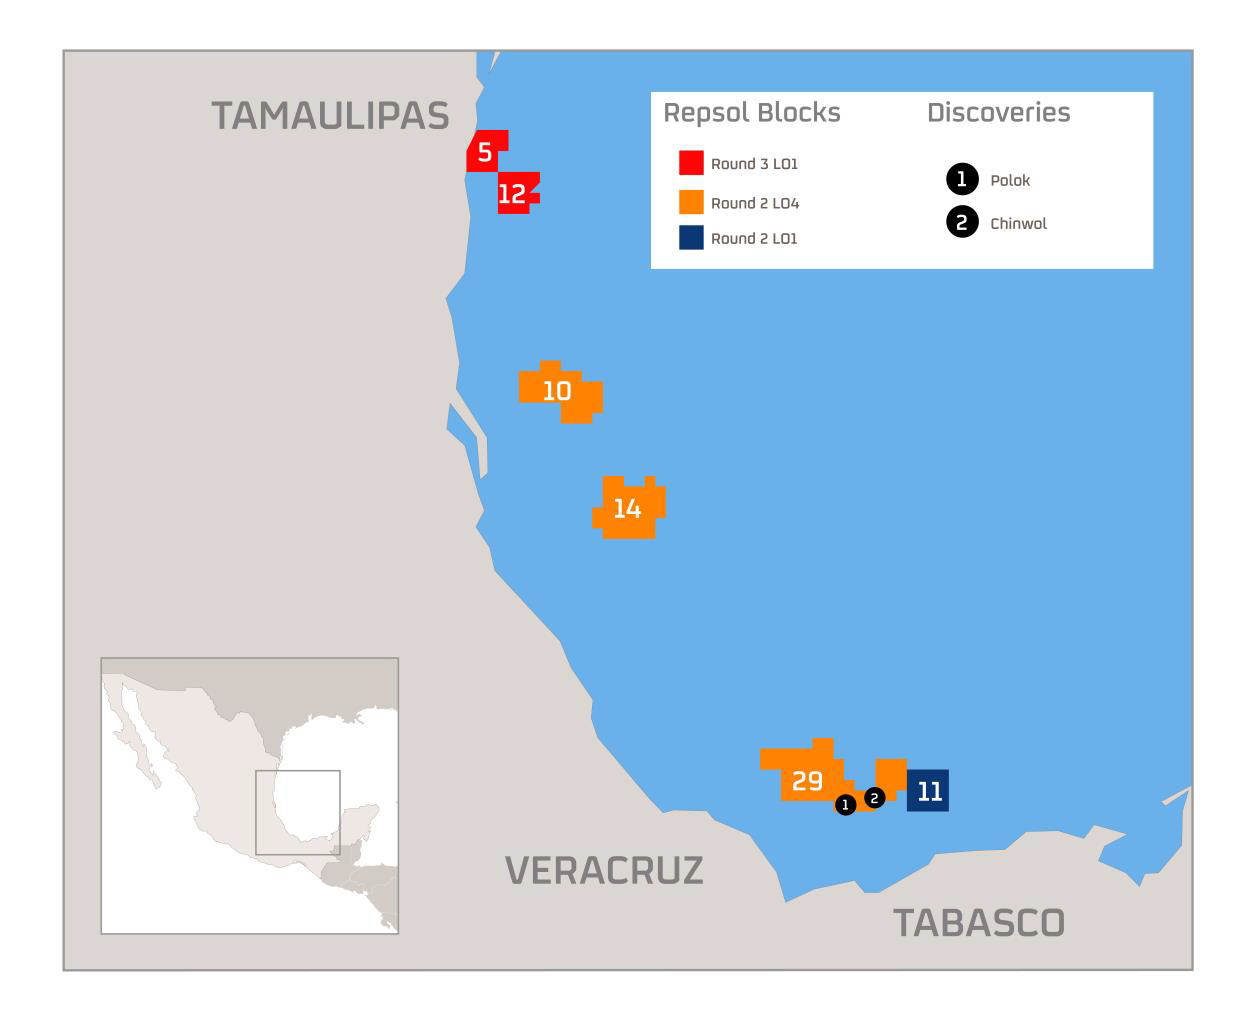 Map showing the location of the offshore oil discoveries in Mexico 